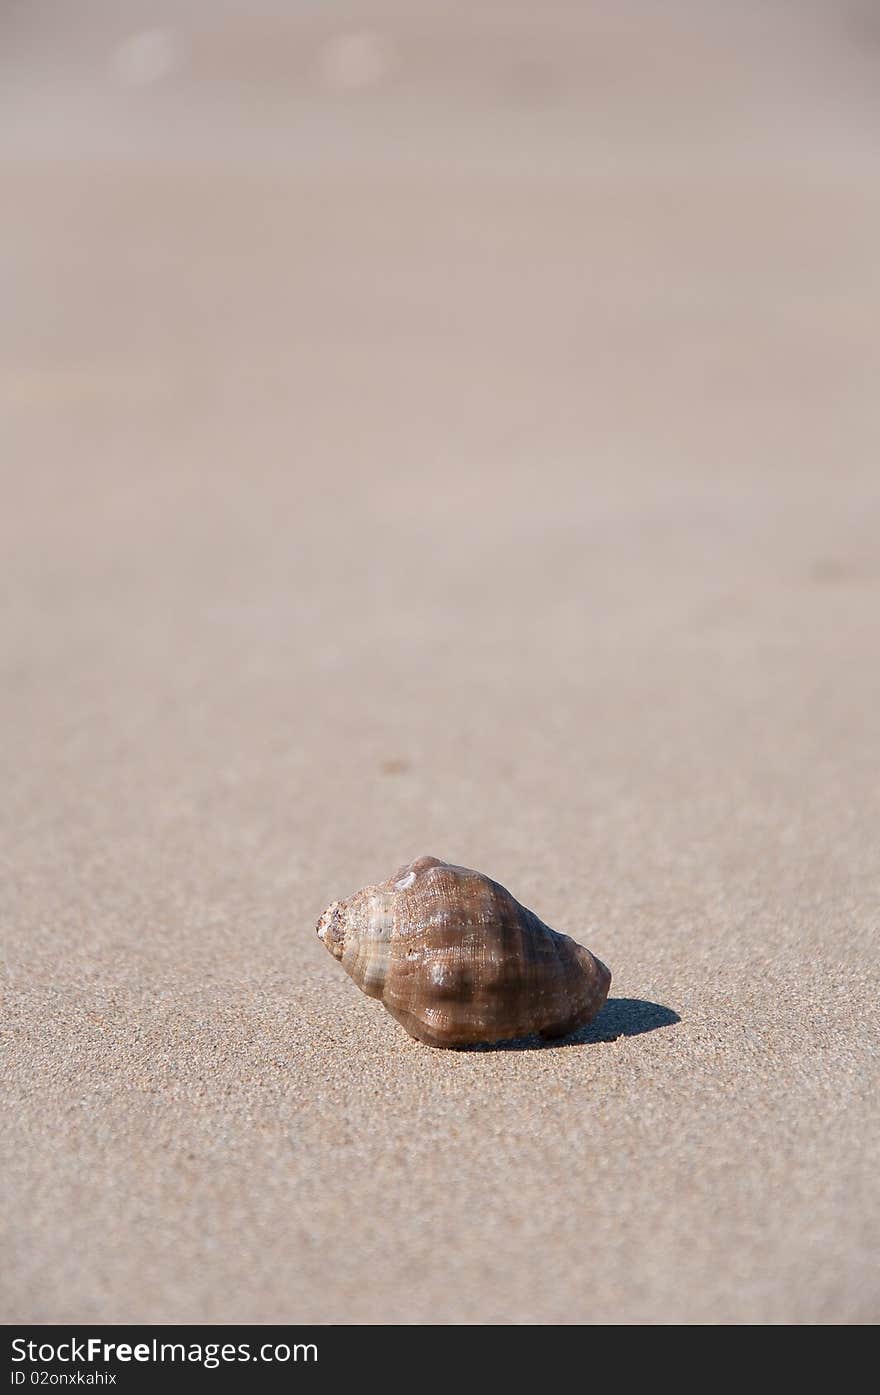 Shell in the sand of the beach in a sunny day